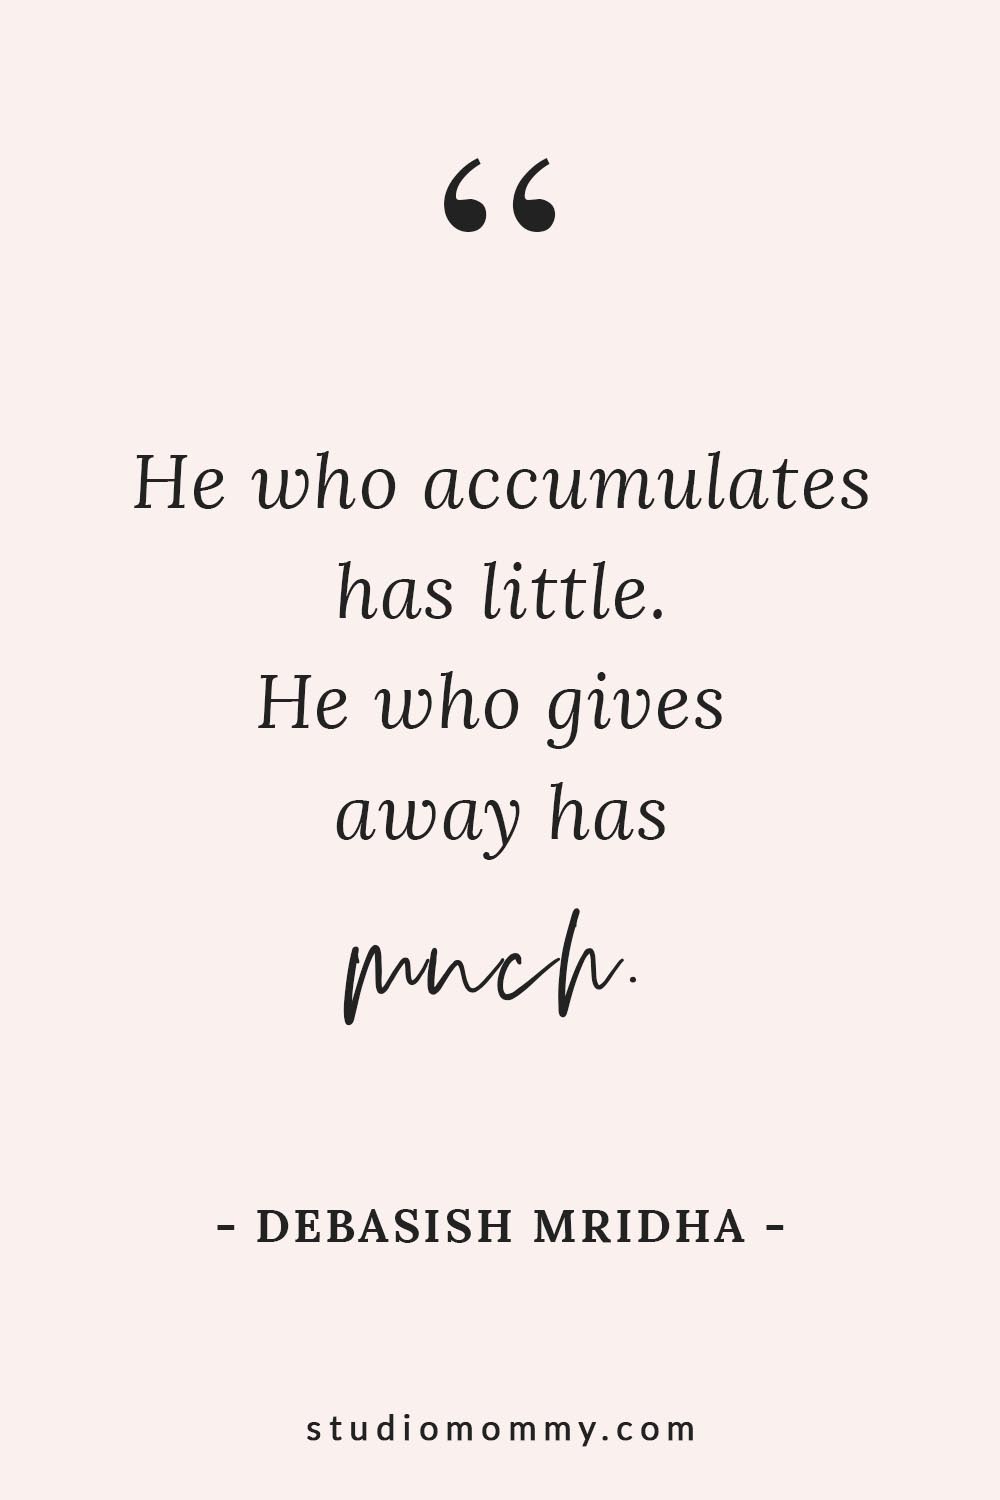 He who accumulates has little. He who gives away has much. - Debasish Mridha